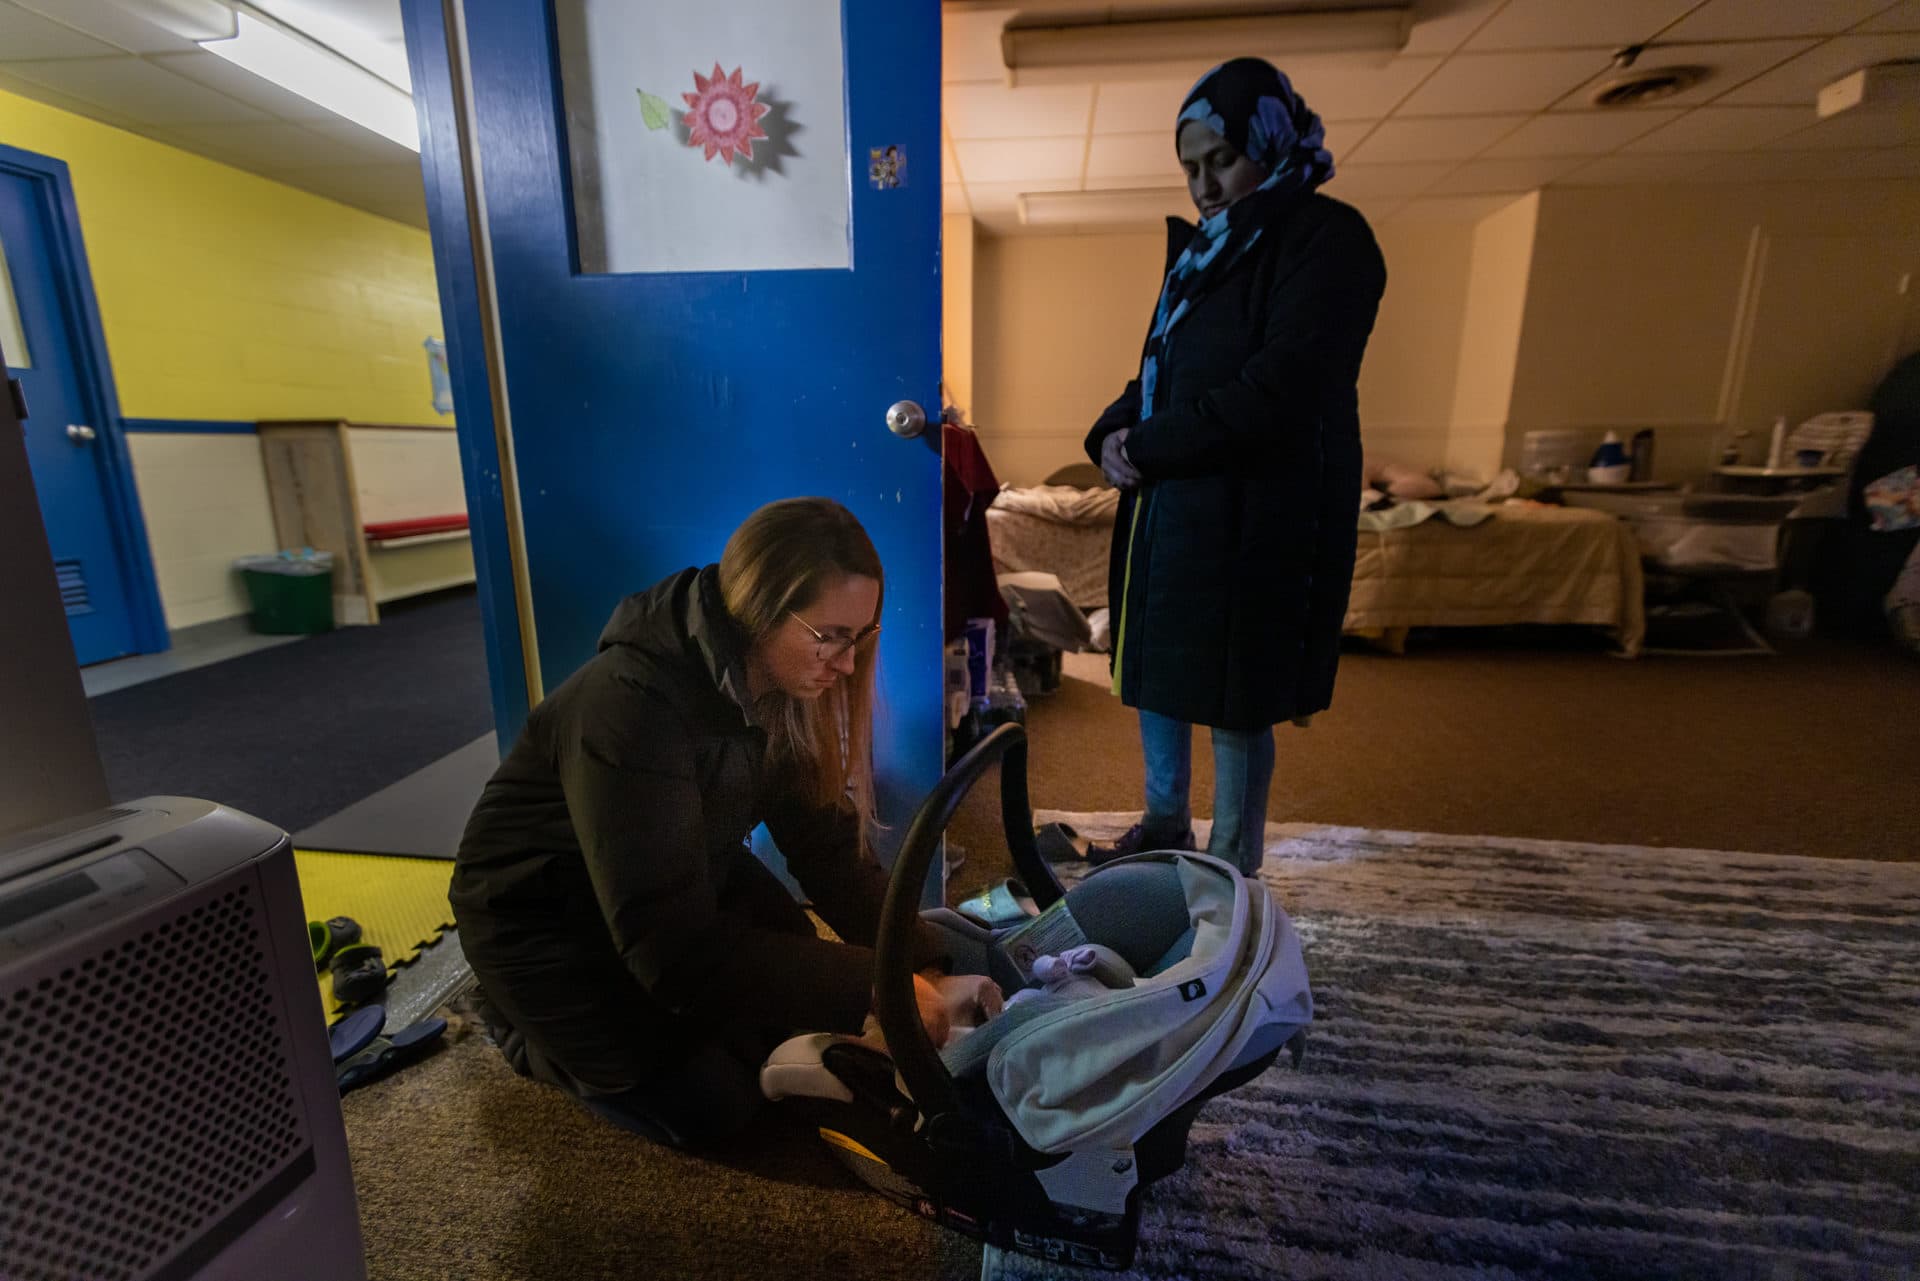 Chelsea Mercer, wife of Rev. Jarred Mercer, places Gulalai's daughter Nadya in a car seat to take the two of them to an appointment at the pediatrician. (Jesse Costa/WBUR)